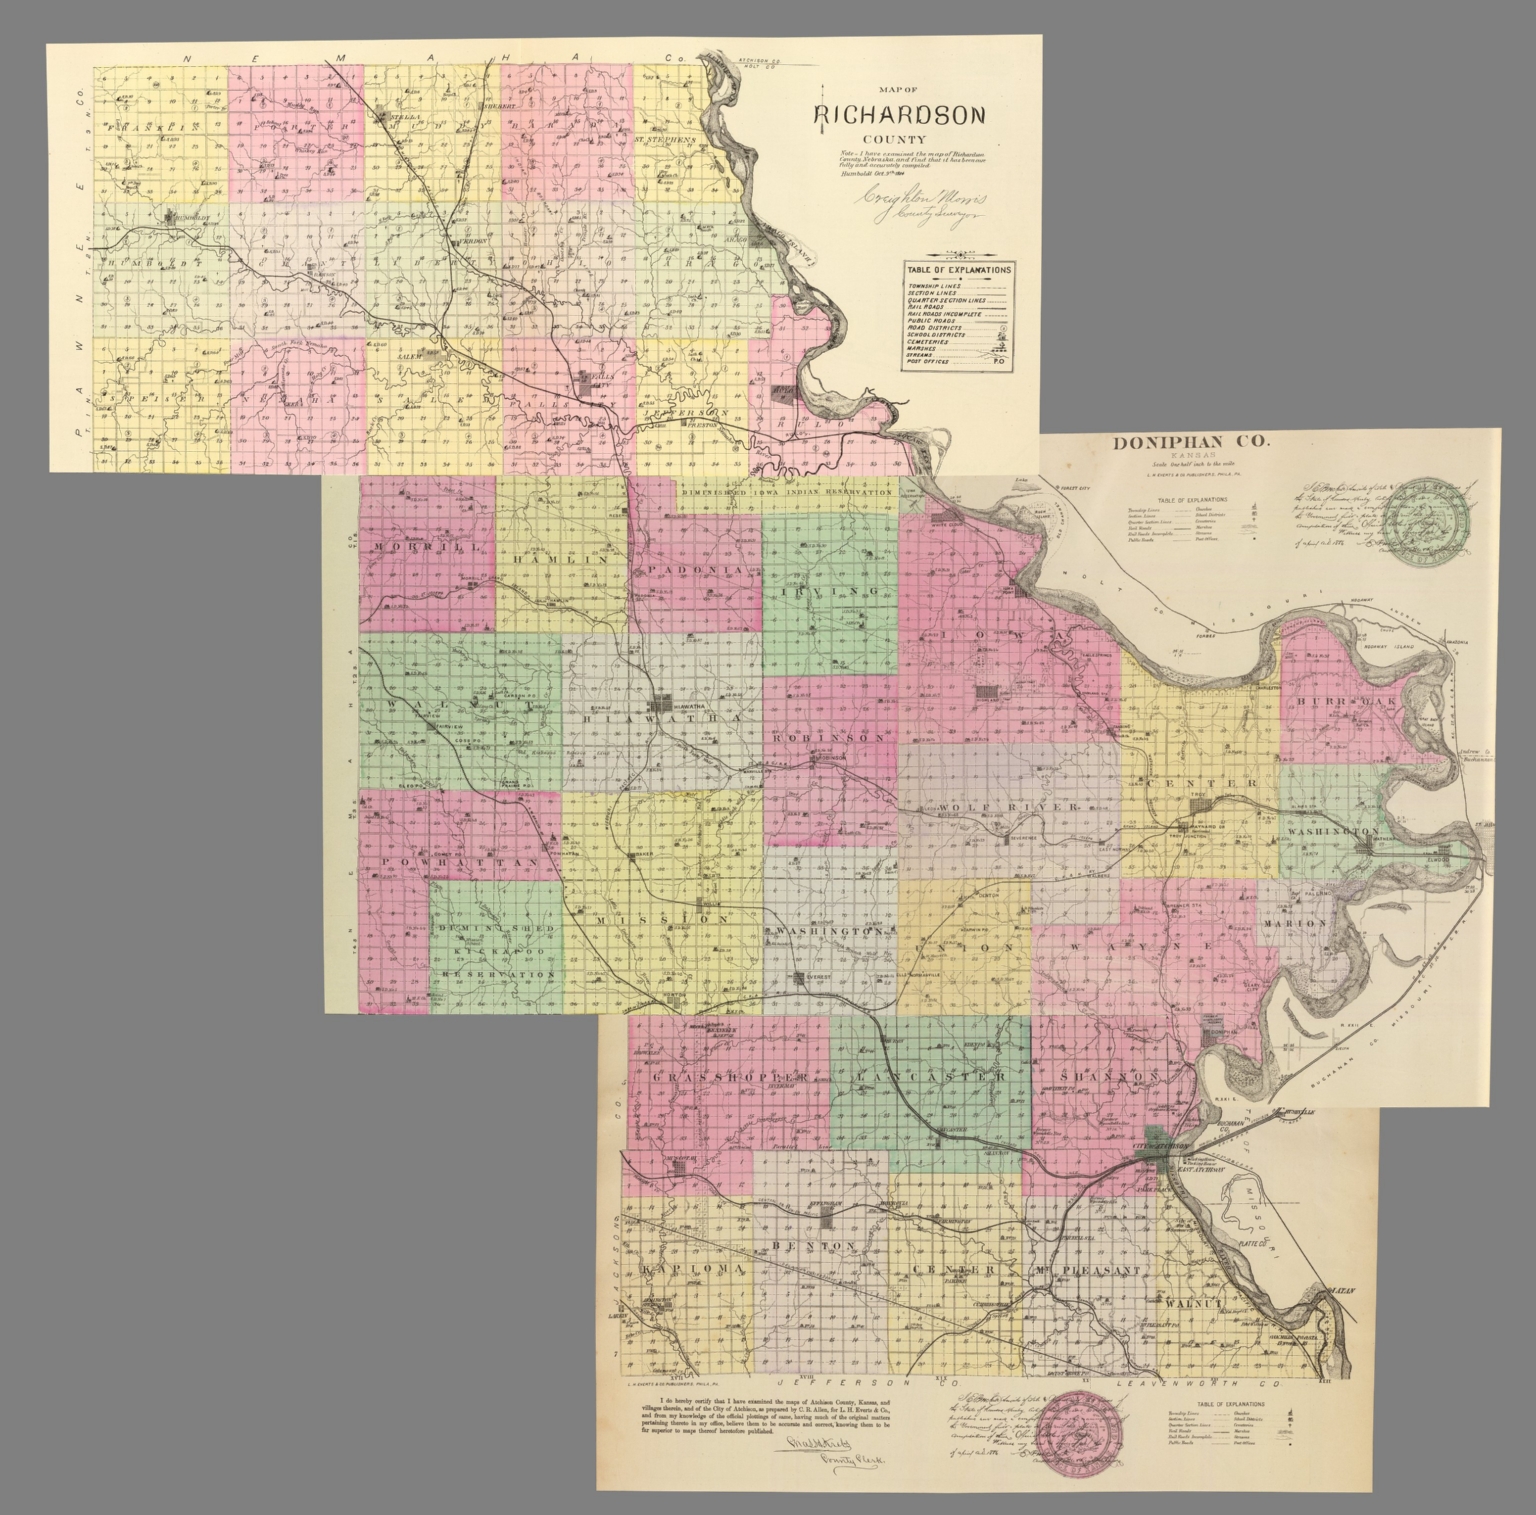 Composite County Maps Of Richardson County In Nebraska And Doniphan